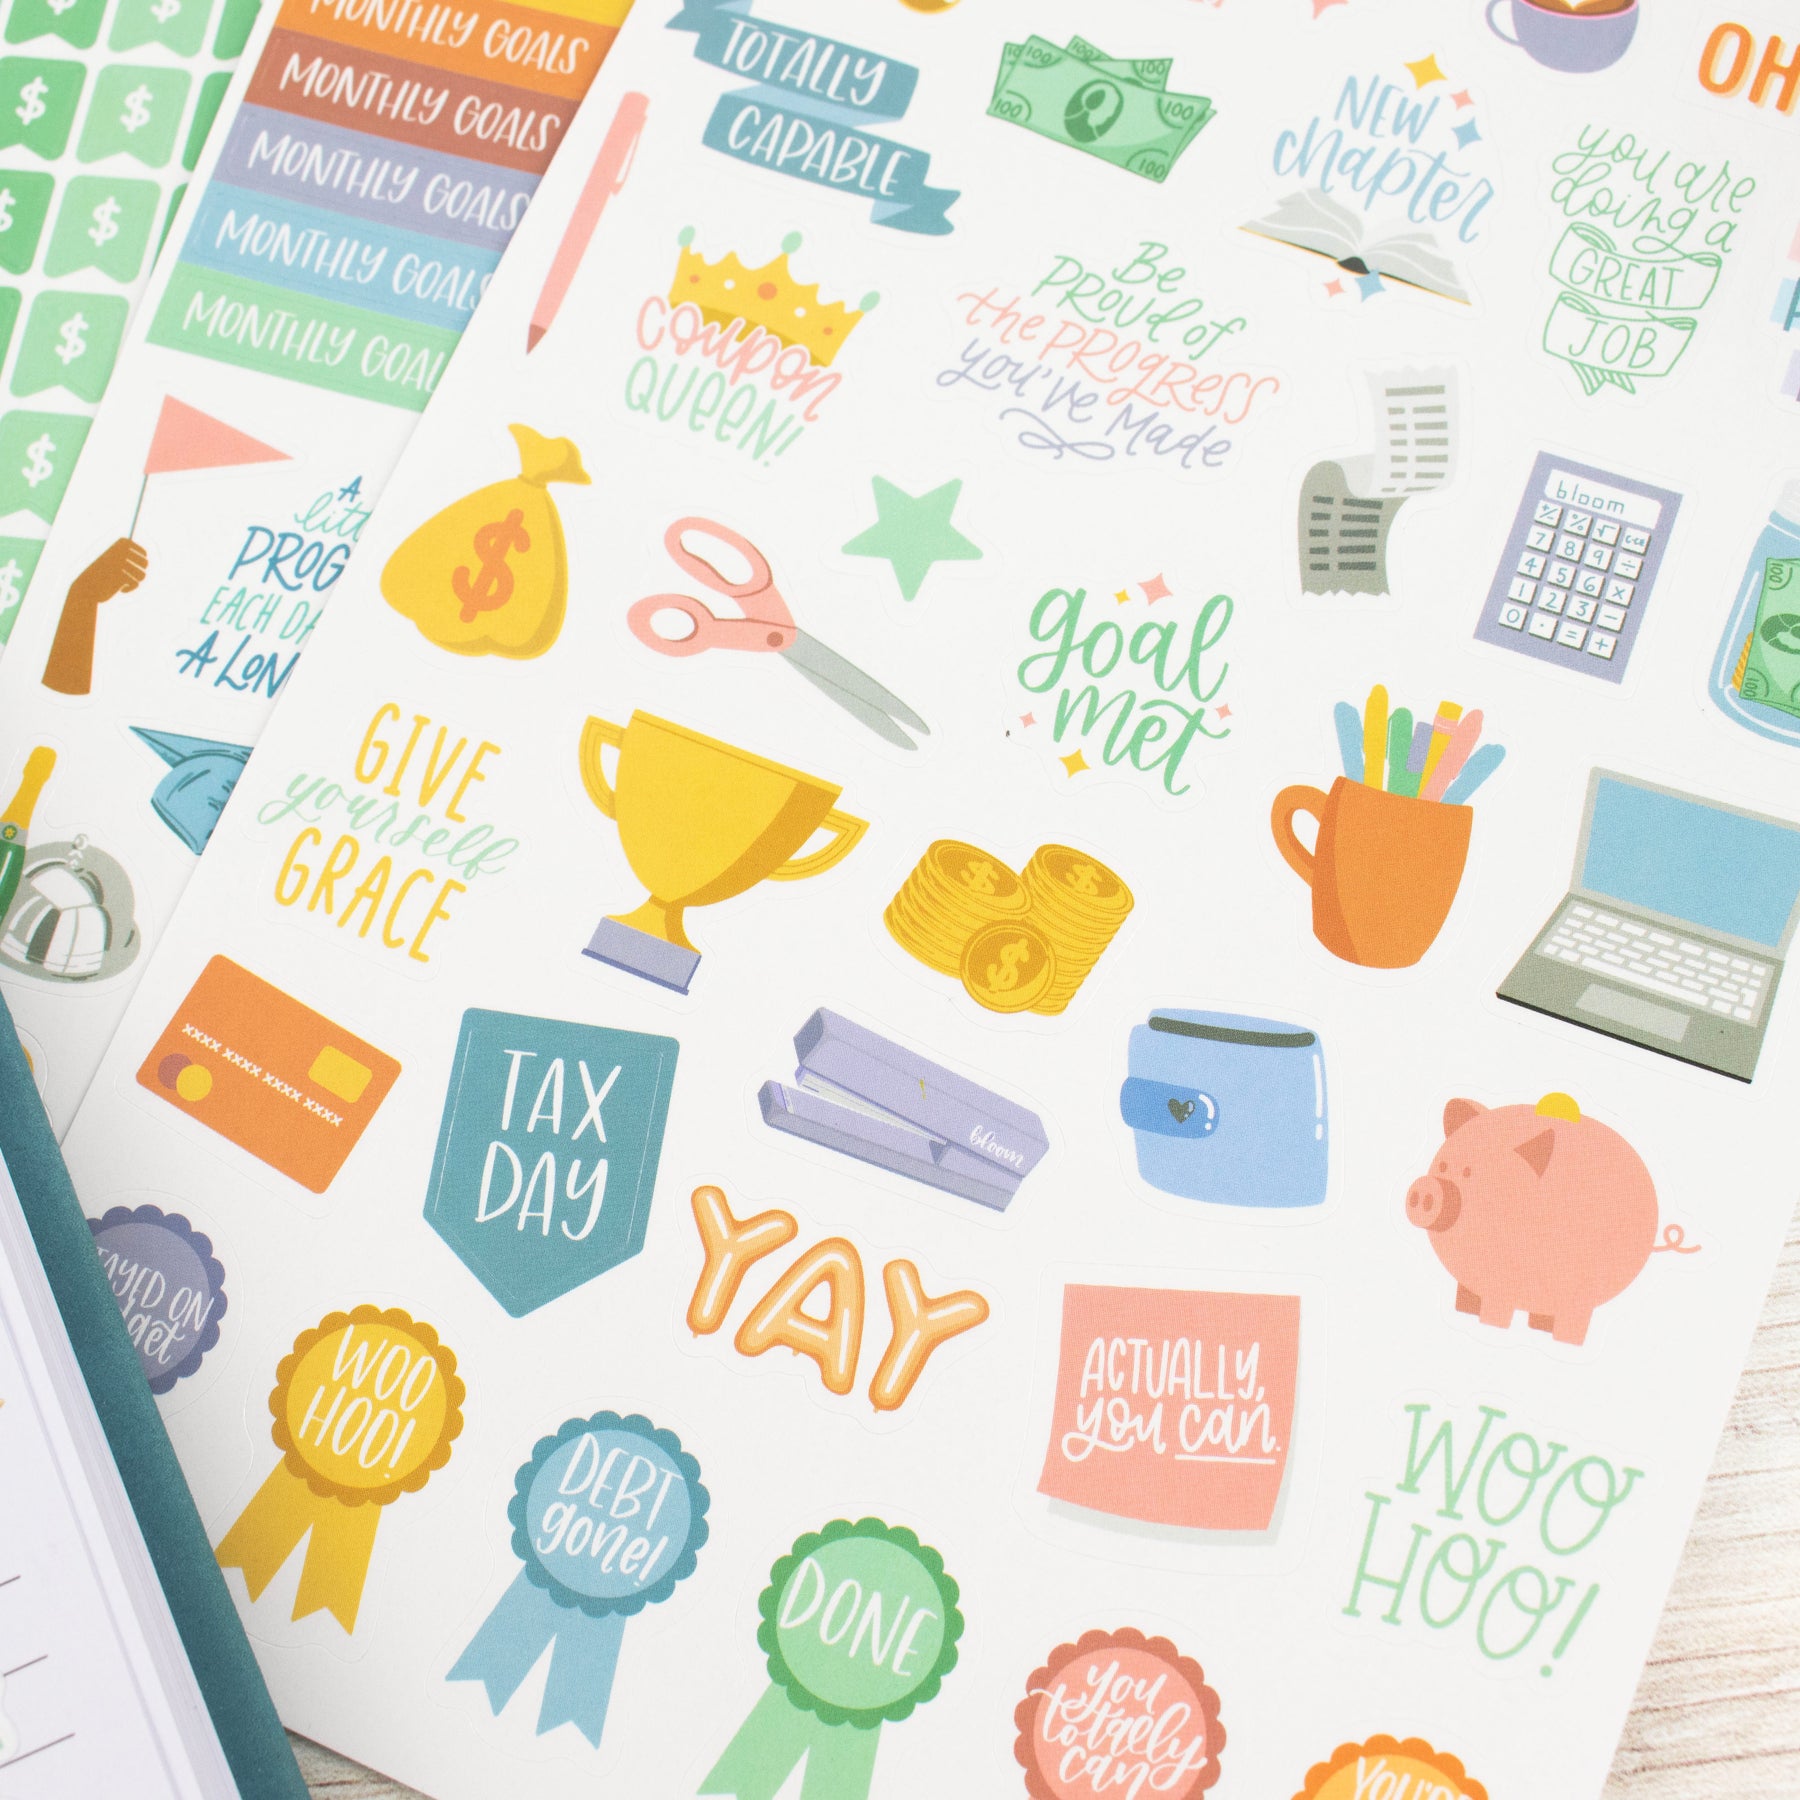 Book Reading Stickers, Free Printable Planner and Bullet Journal Stickers